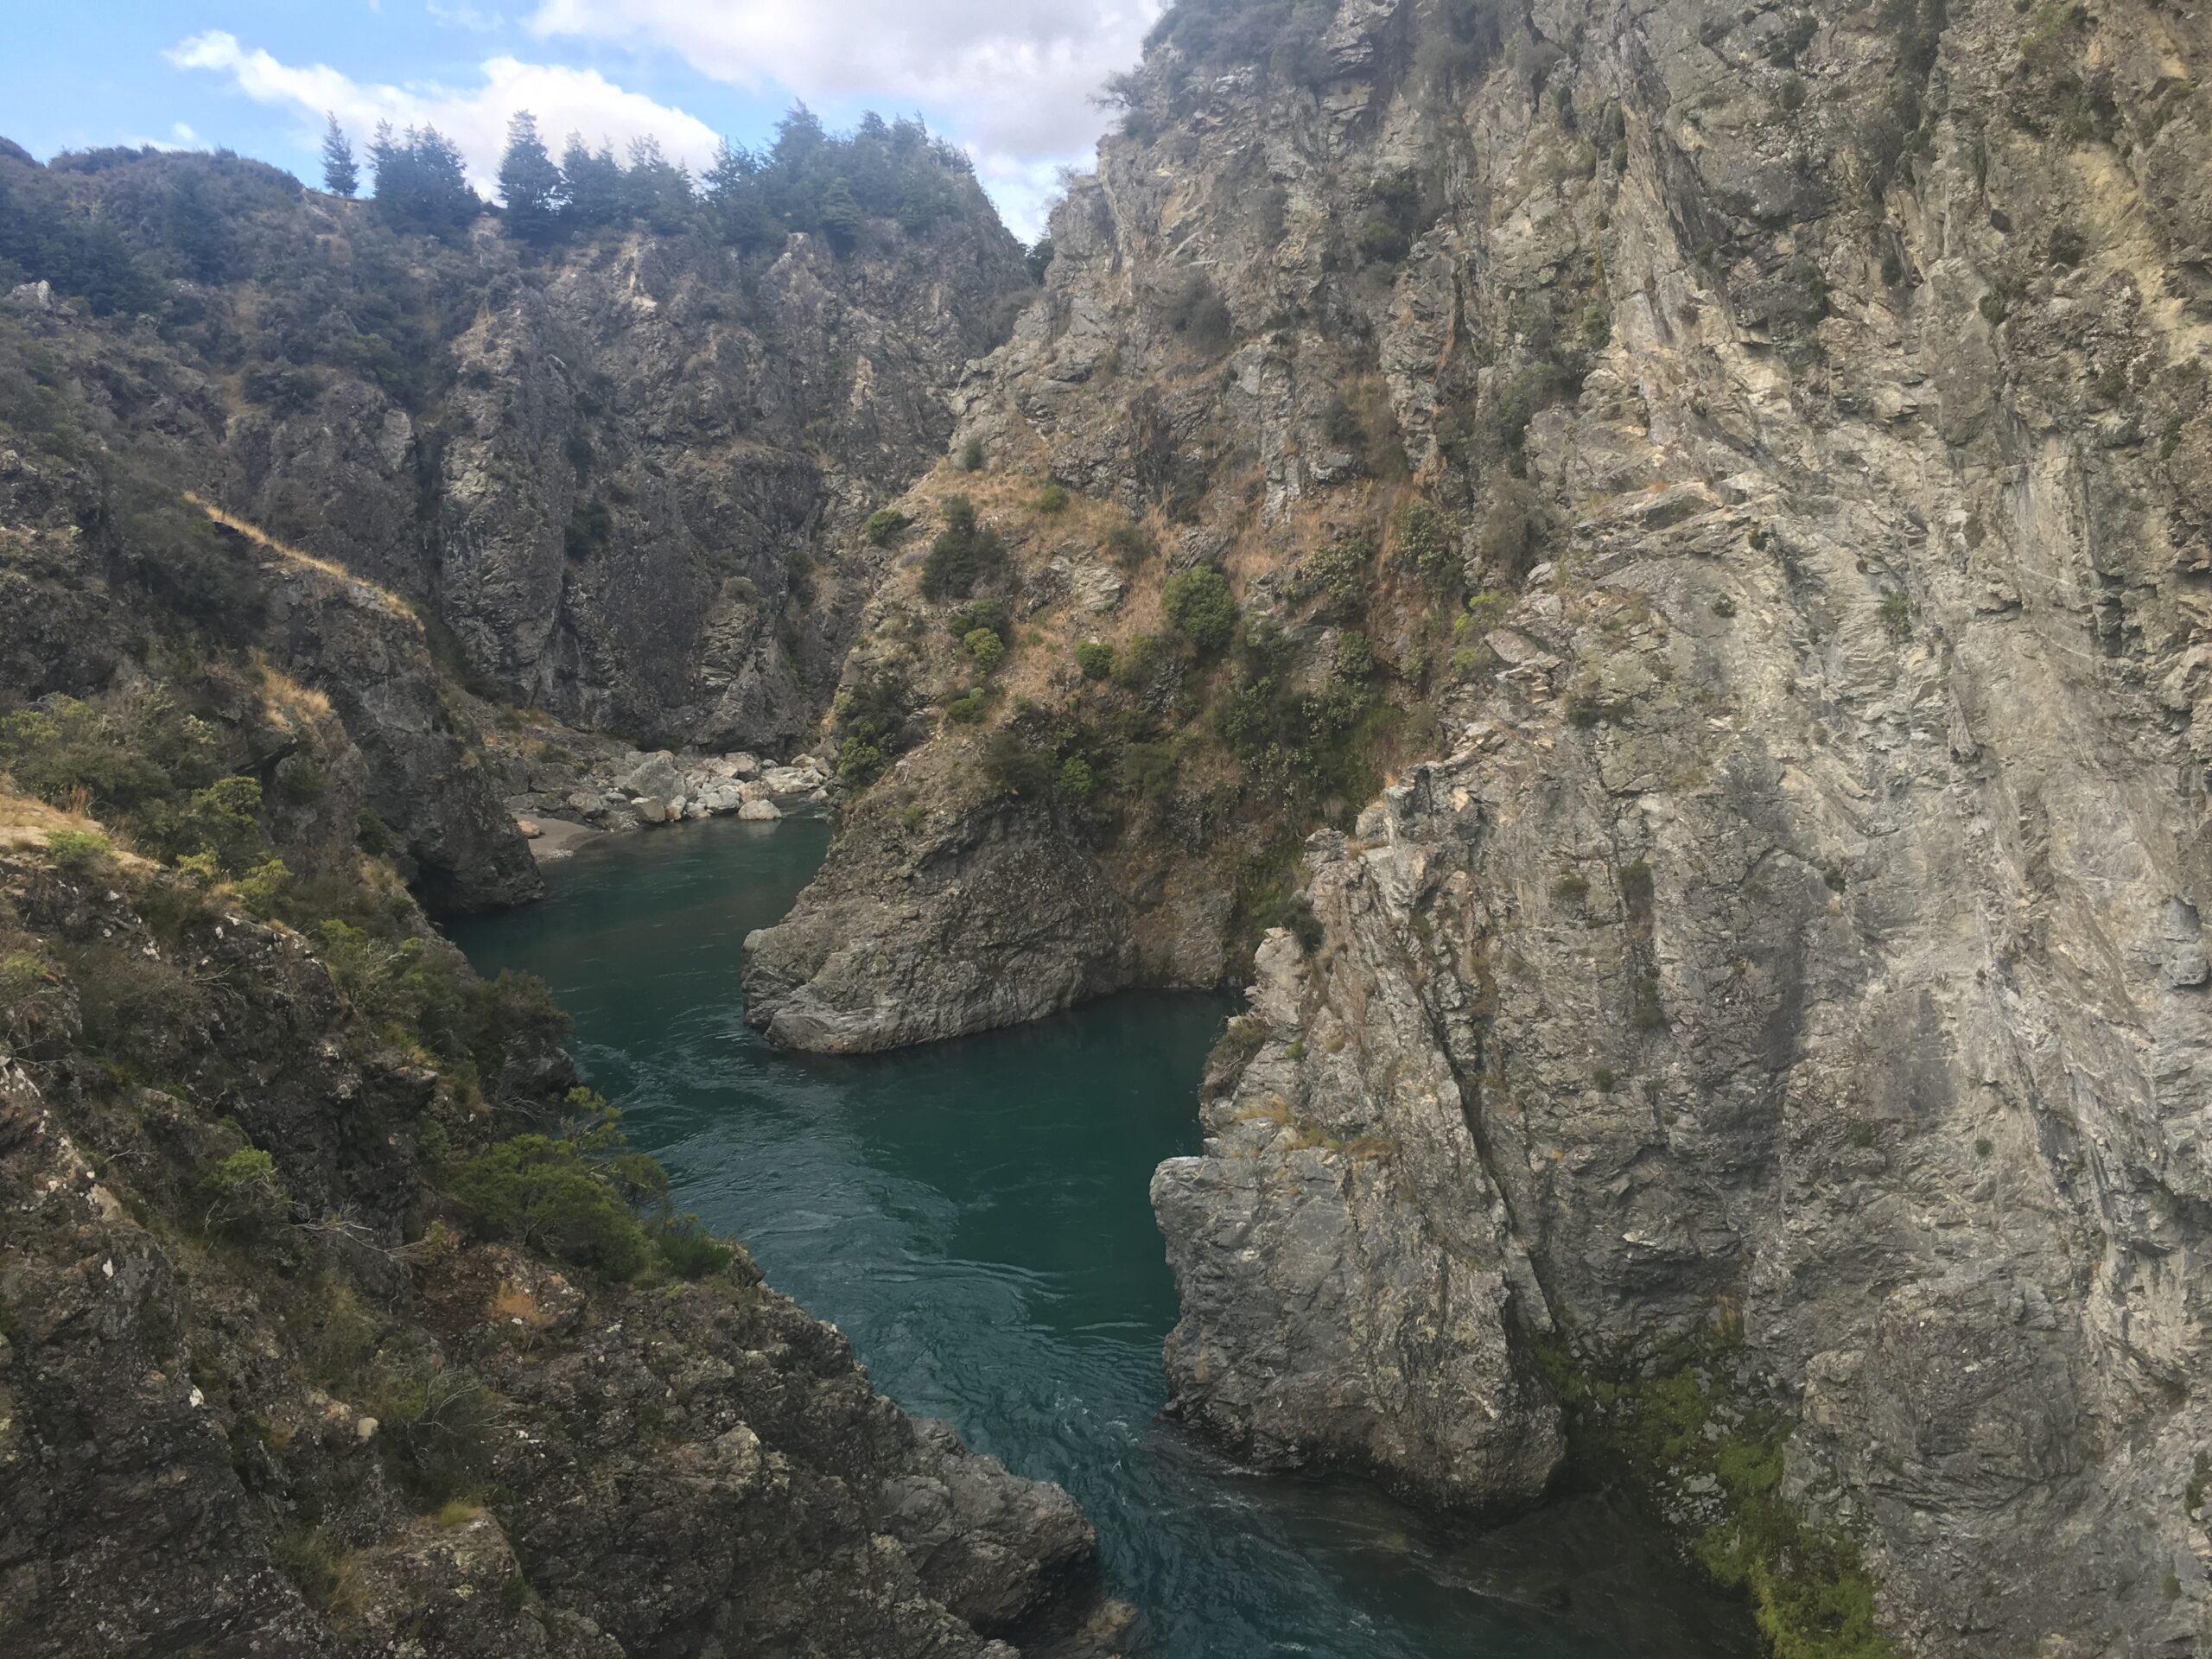 The narrow gorges of the Waiau River below the Ada River confluence make for some exciting whitewater paddling.